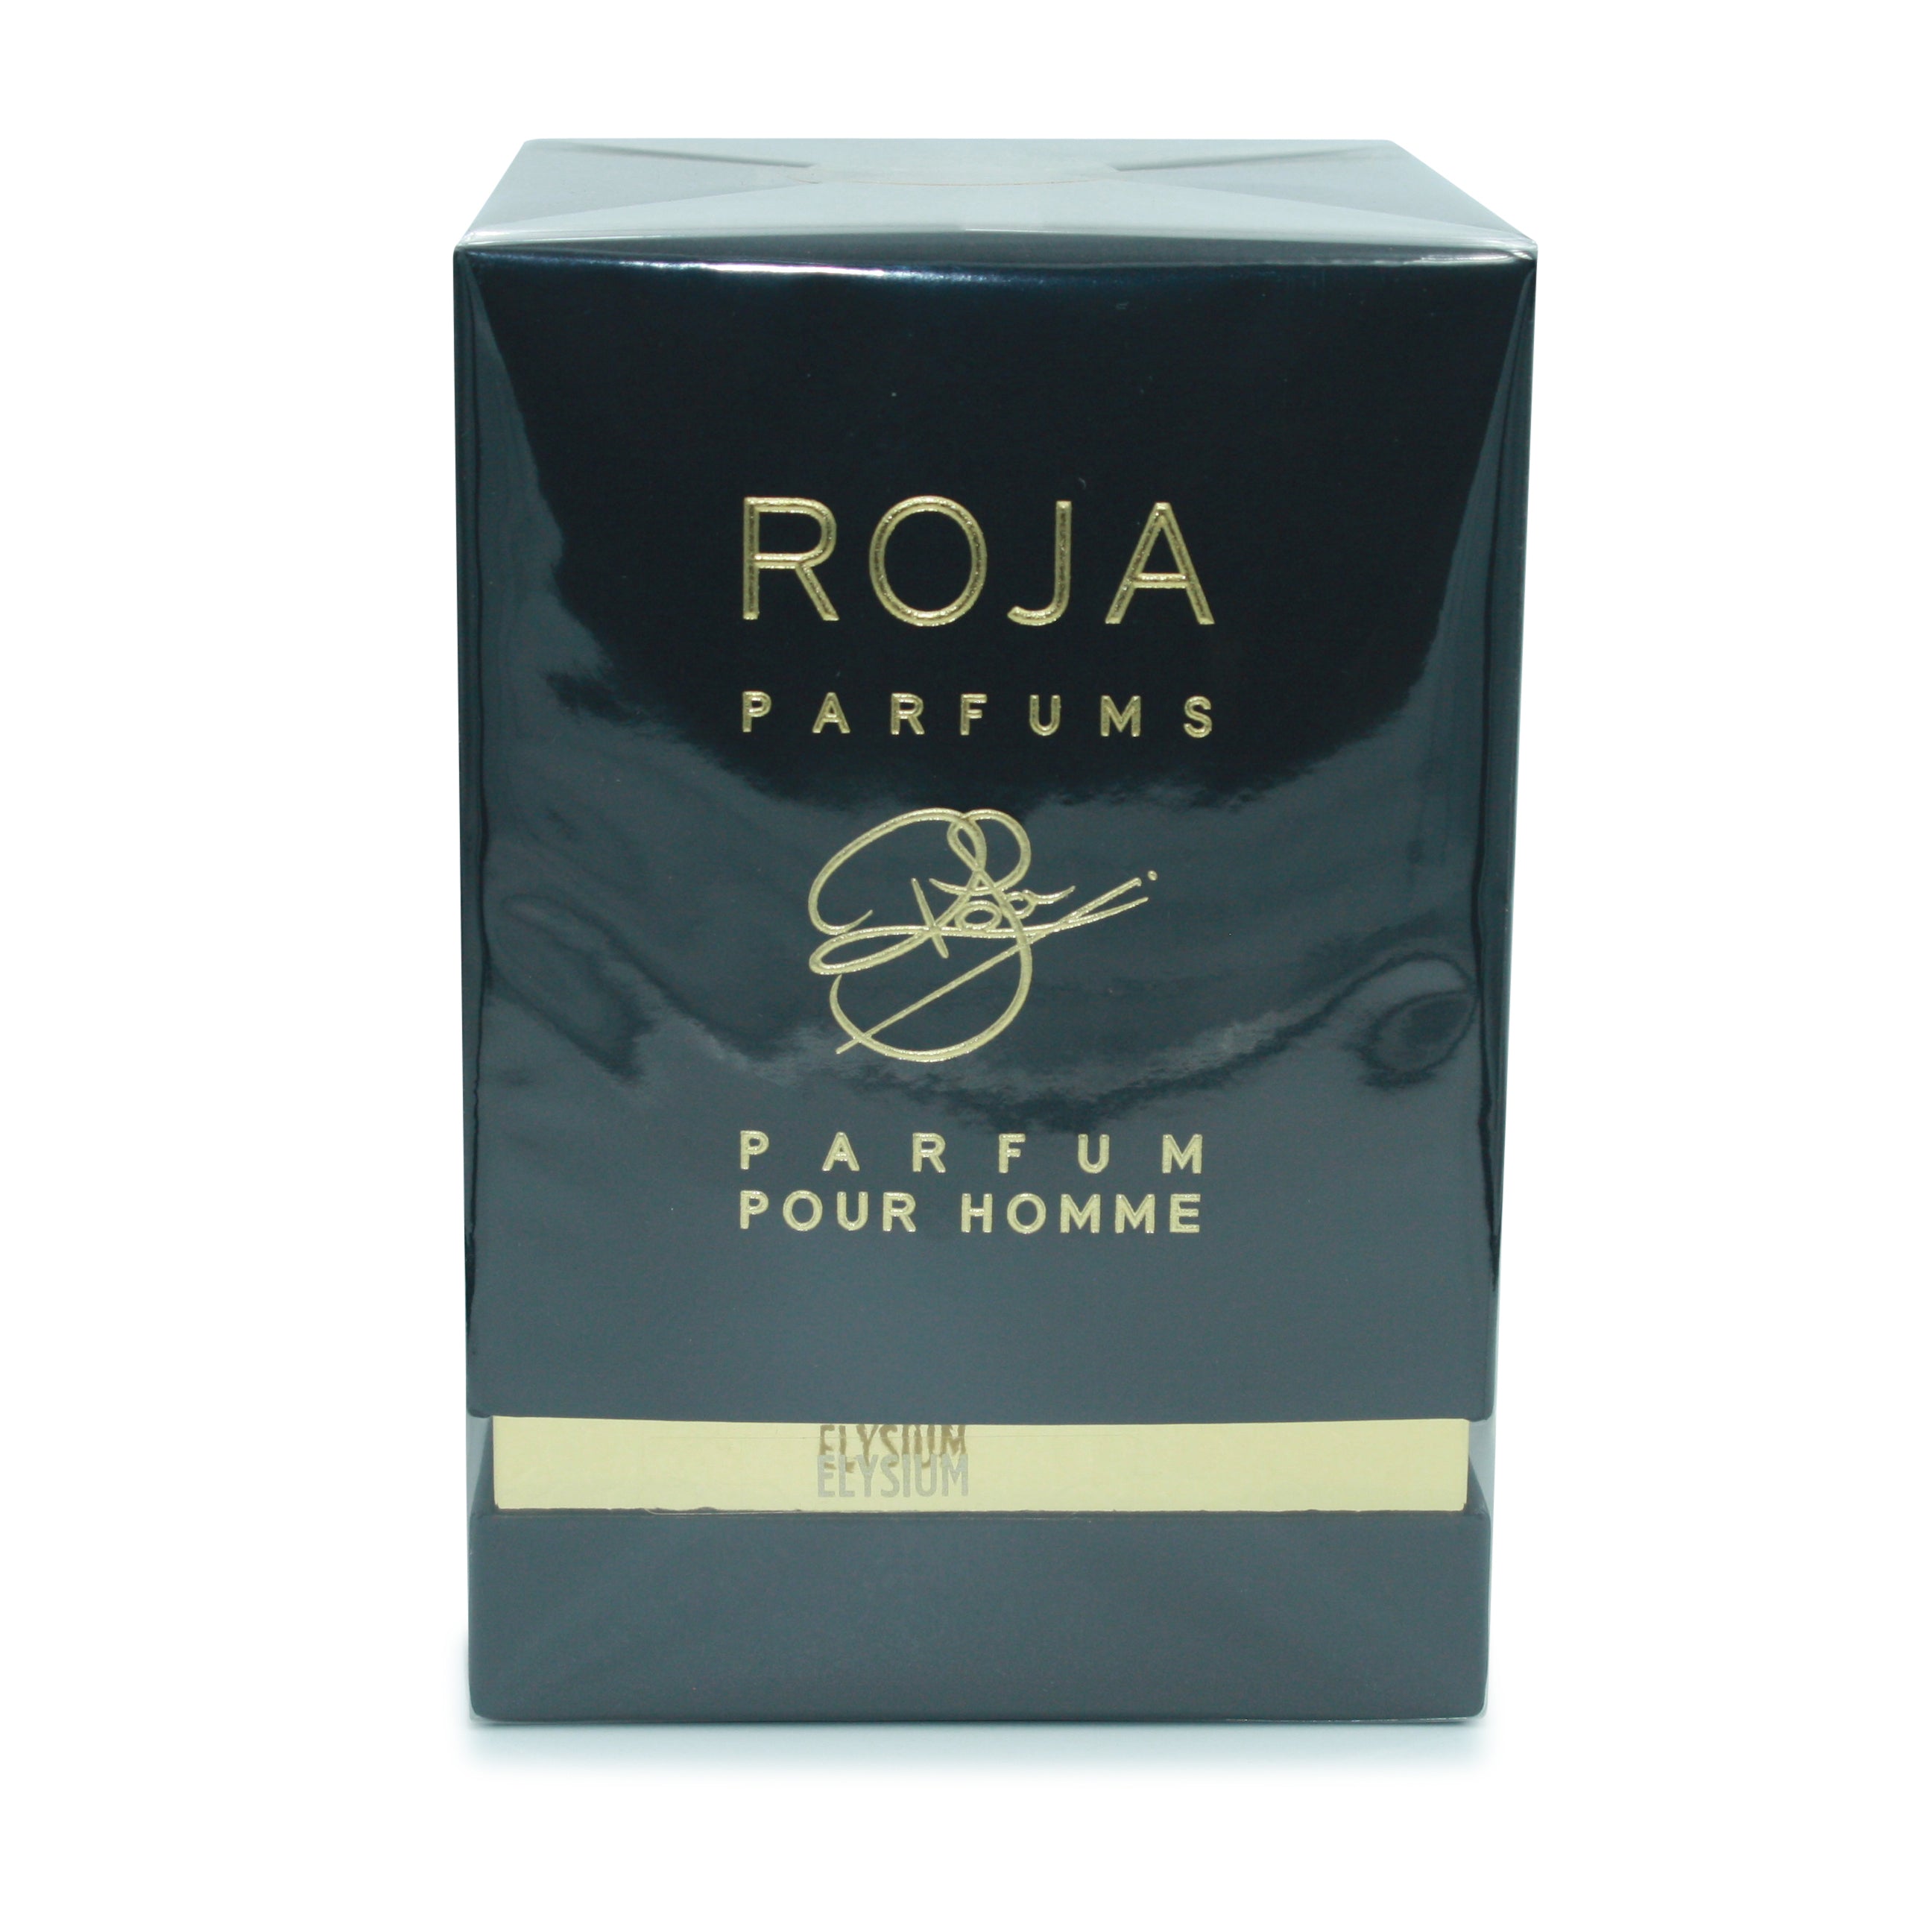 Roja Elysium Pour Homme Perfume for Men by Roja Parfums in Canada